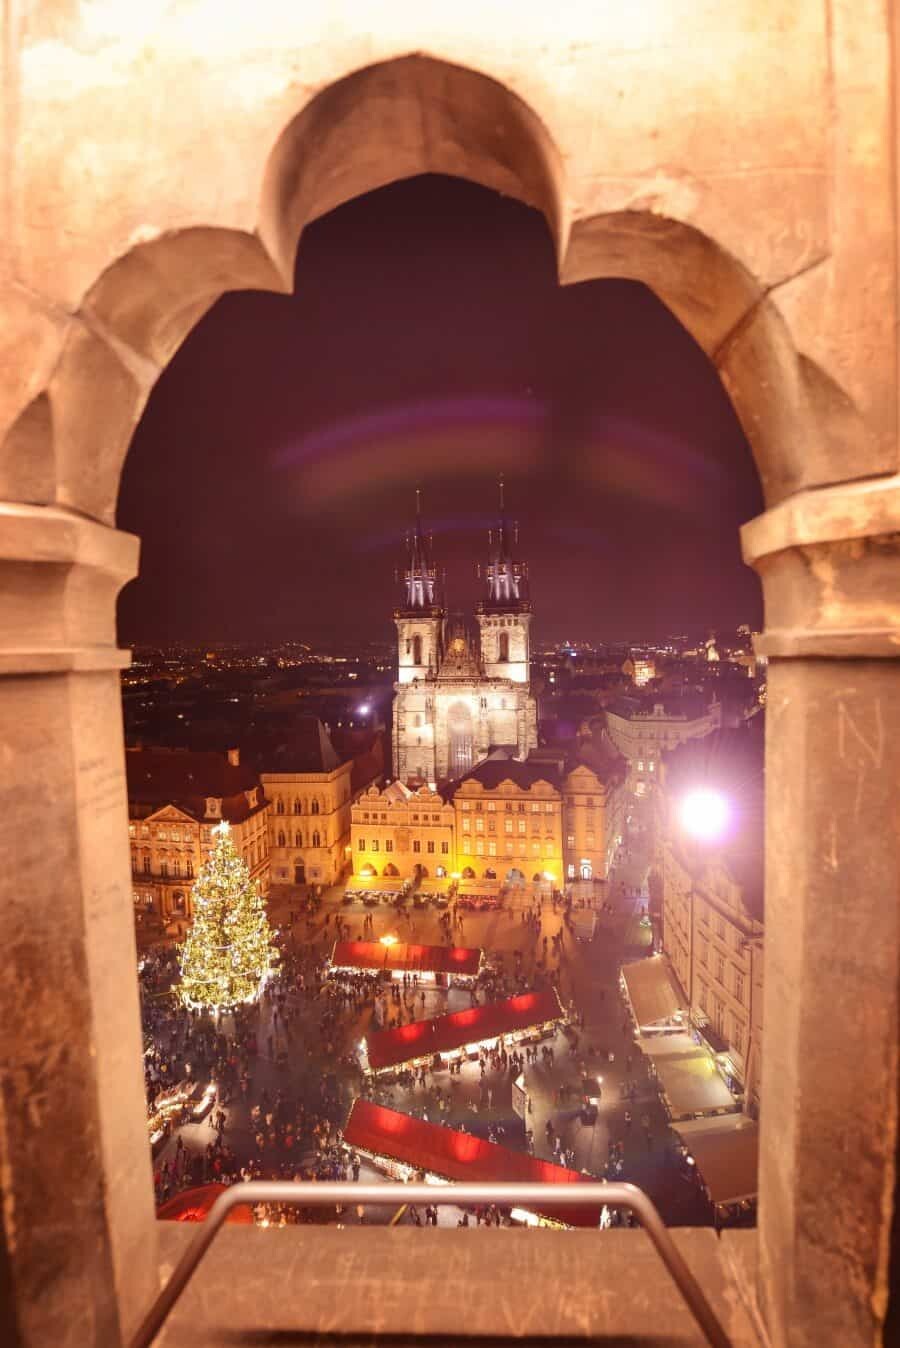 The Best Photography Locations in Prague by The Wandering Lens